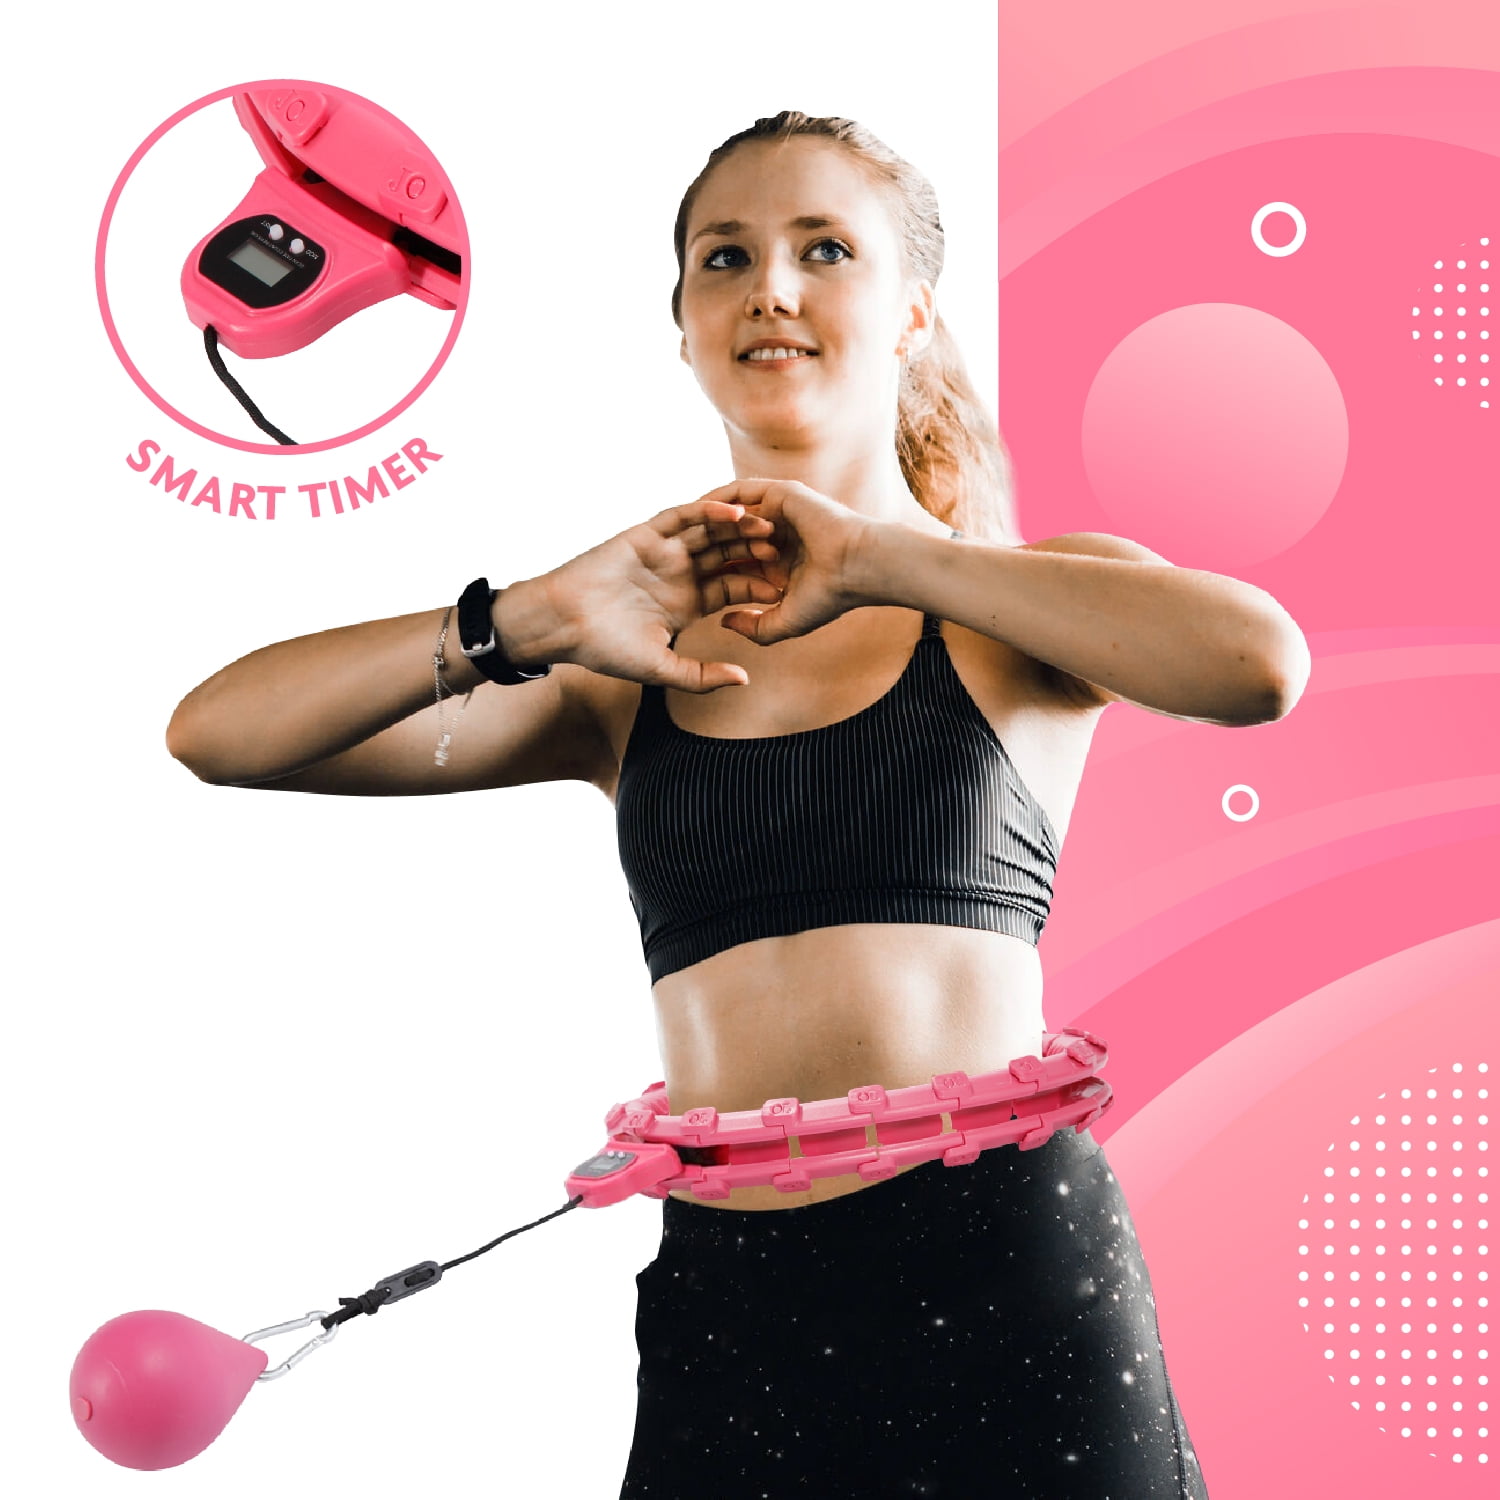 Summer Fitness Intelligent Hula Hoop no-fall design w/ automatic spin counter 